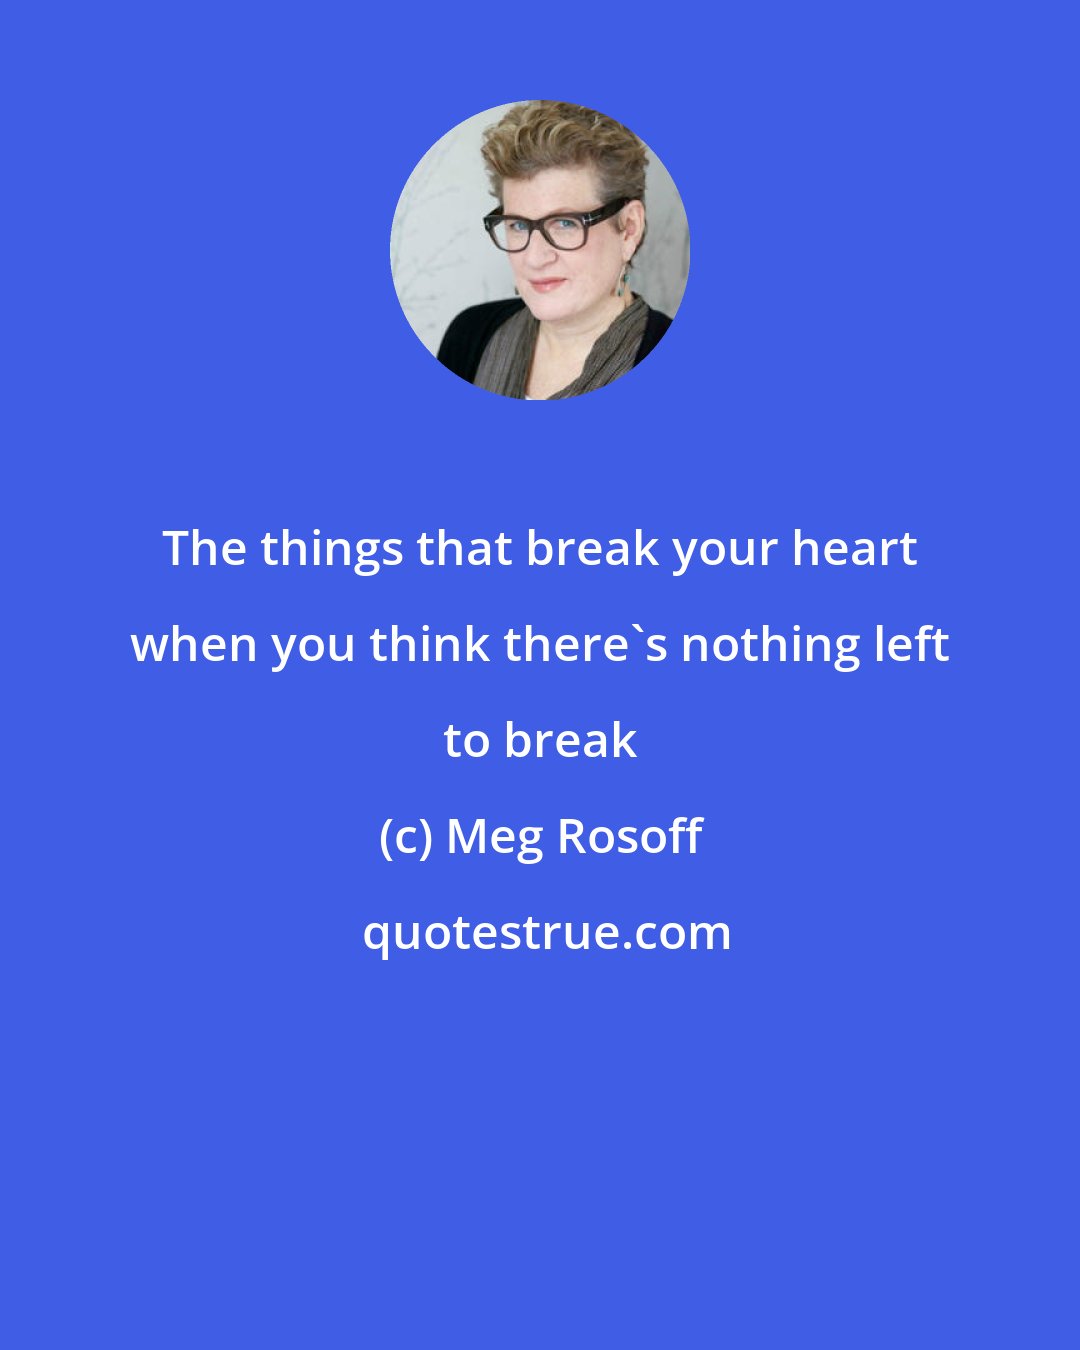 Meg Rosoff: The things that break your heart when you think there`s nothing left to break